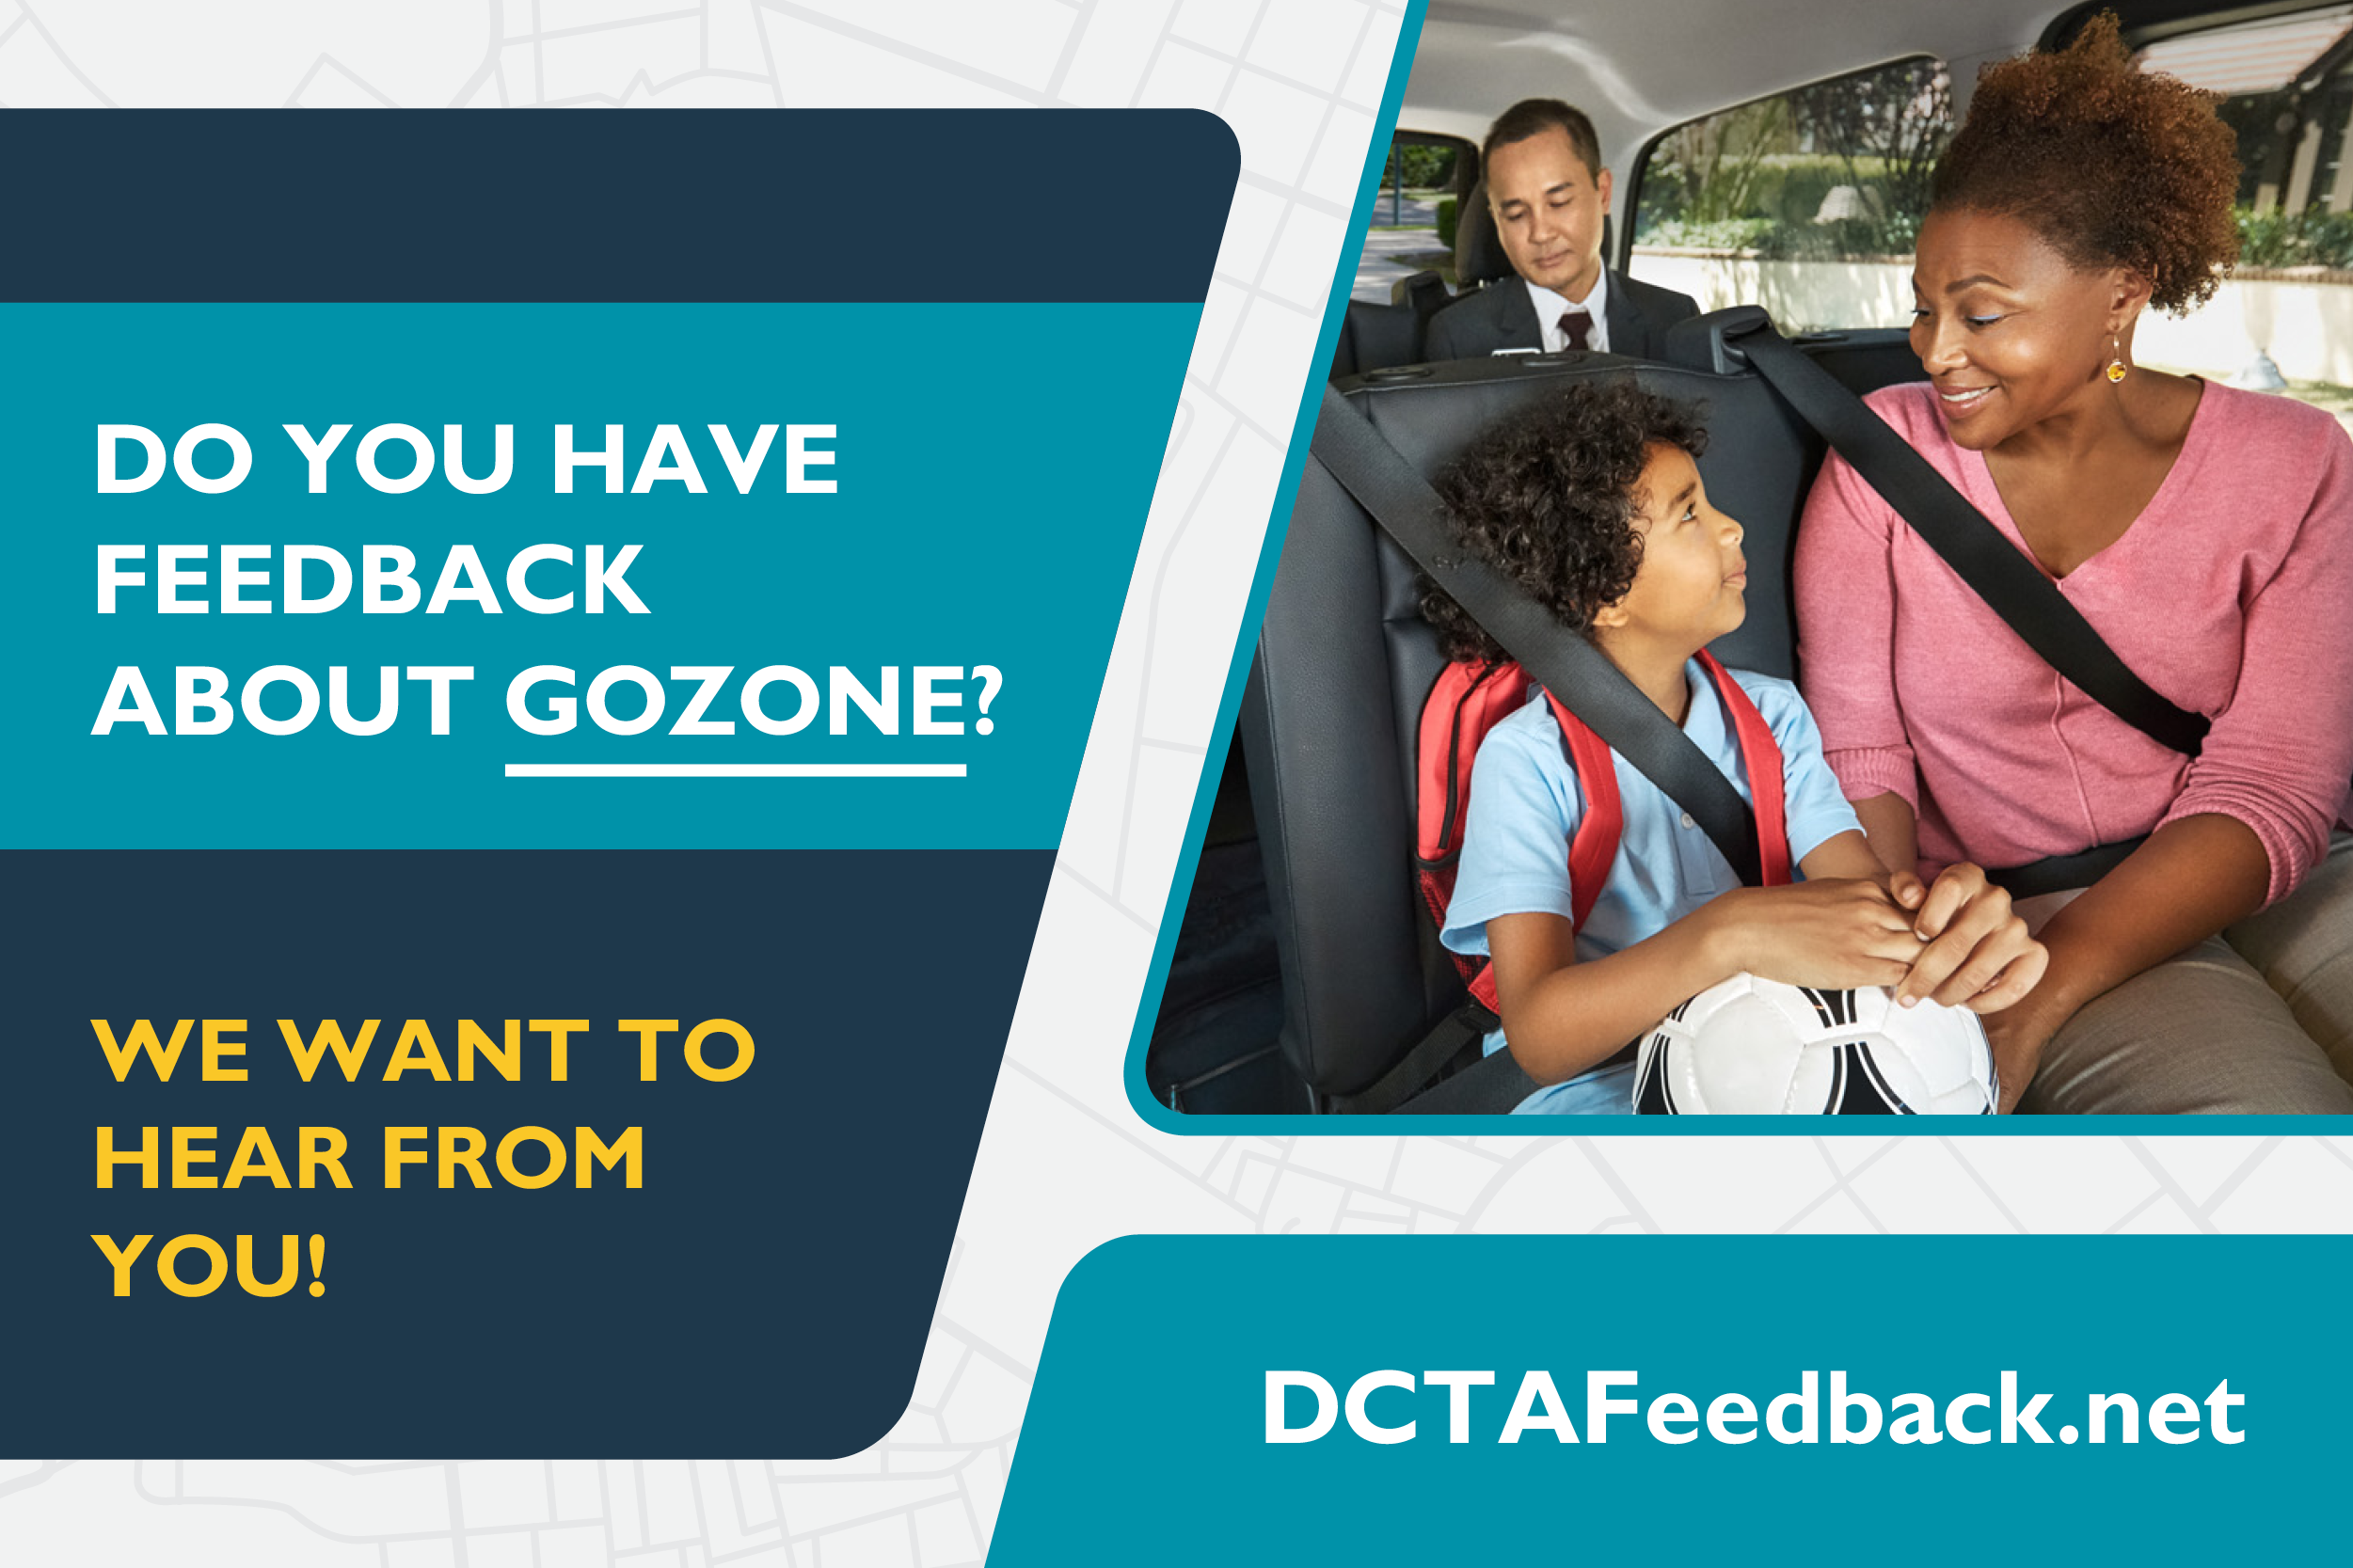 Do you have feedback about gozone? We want to hear from you!